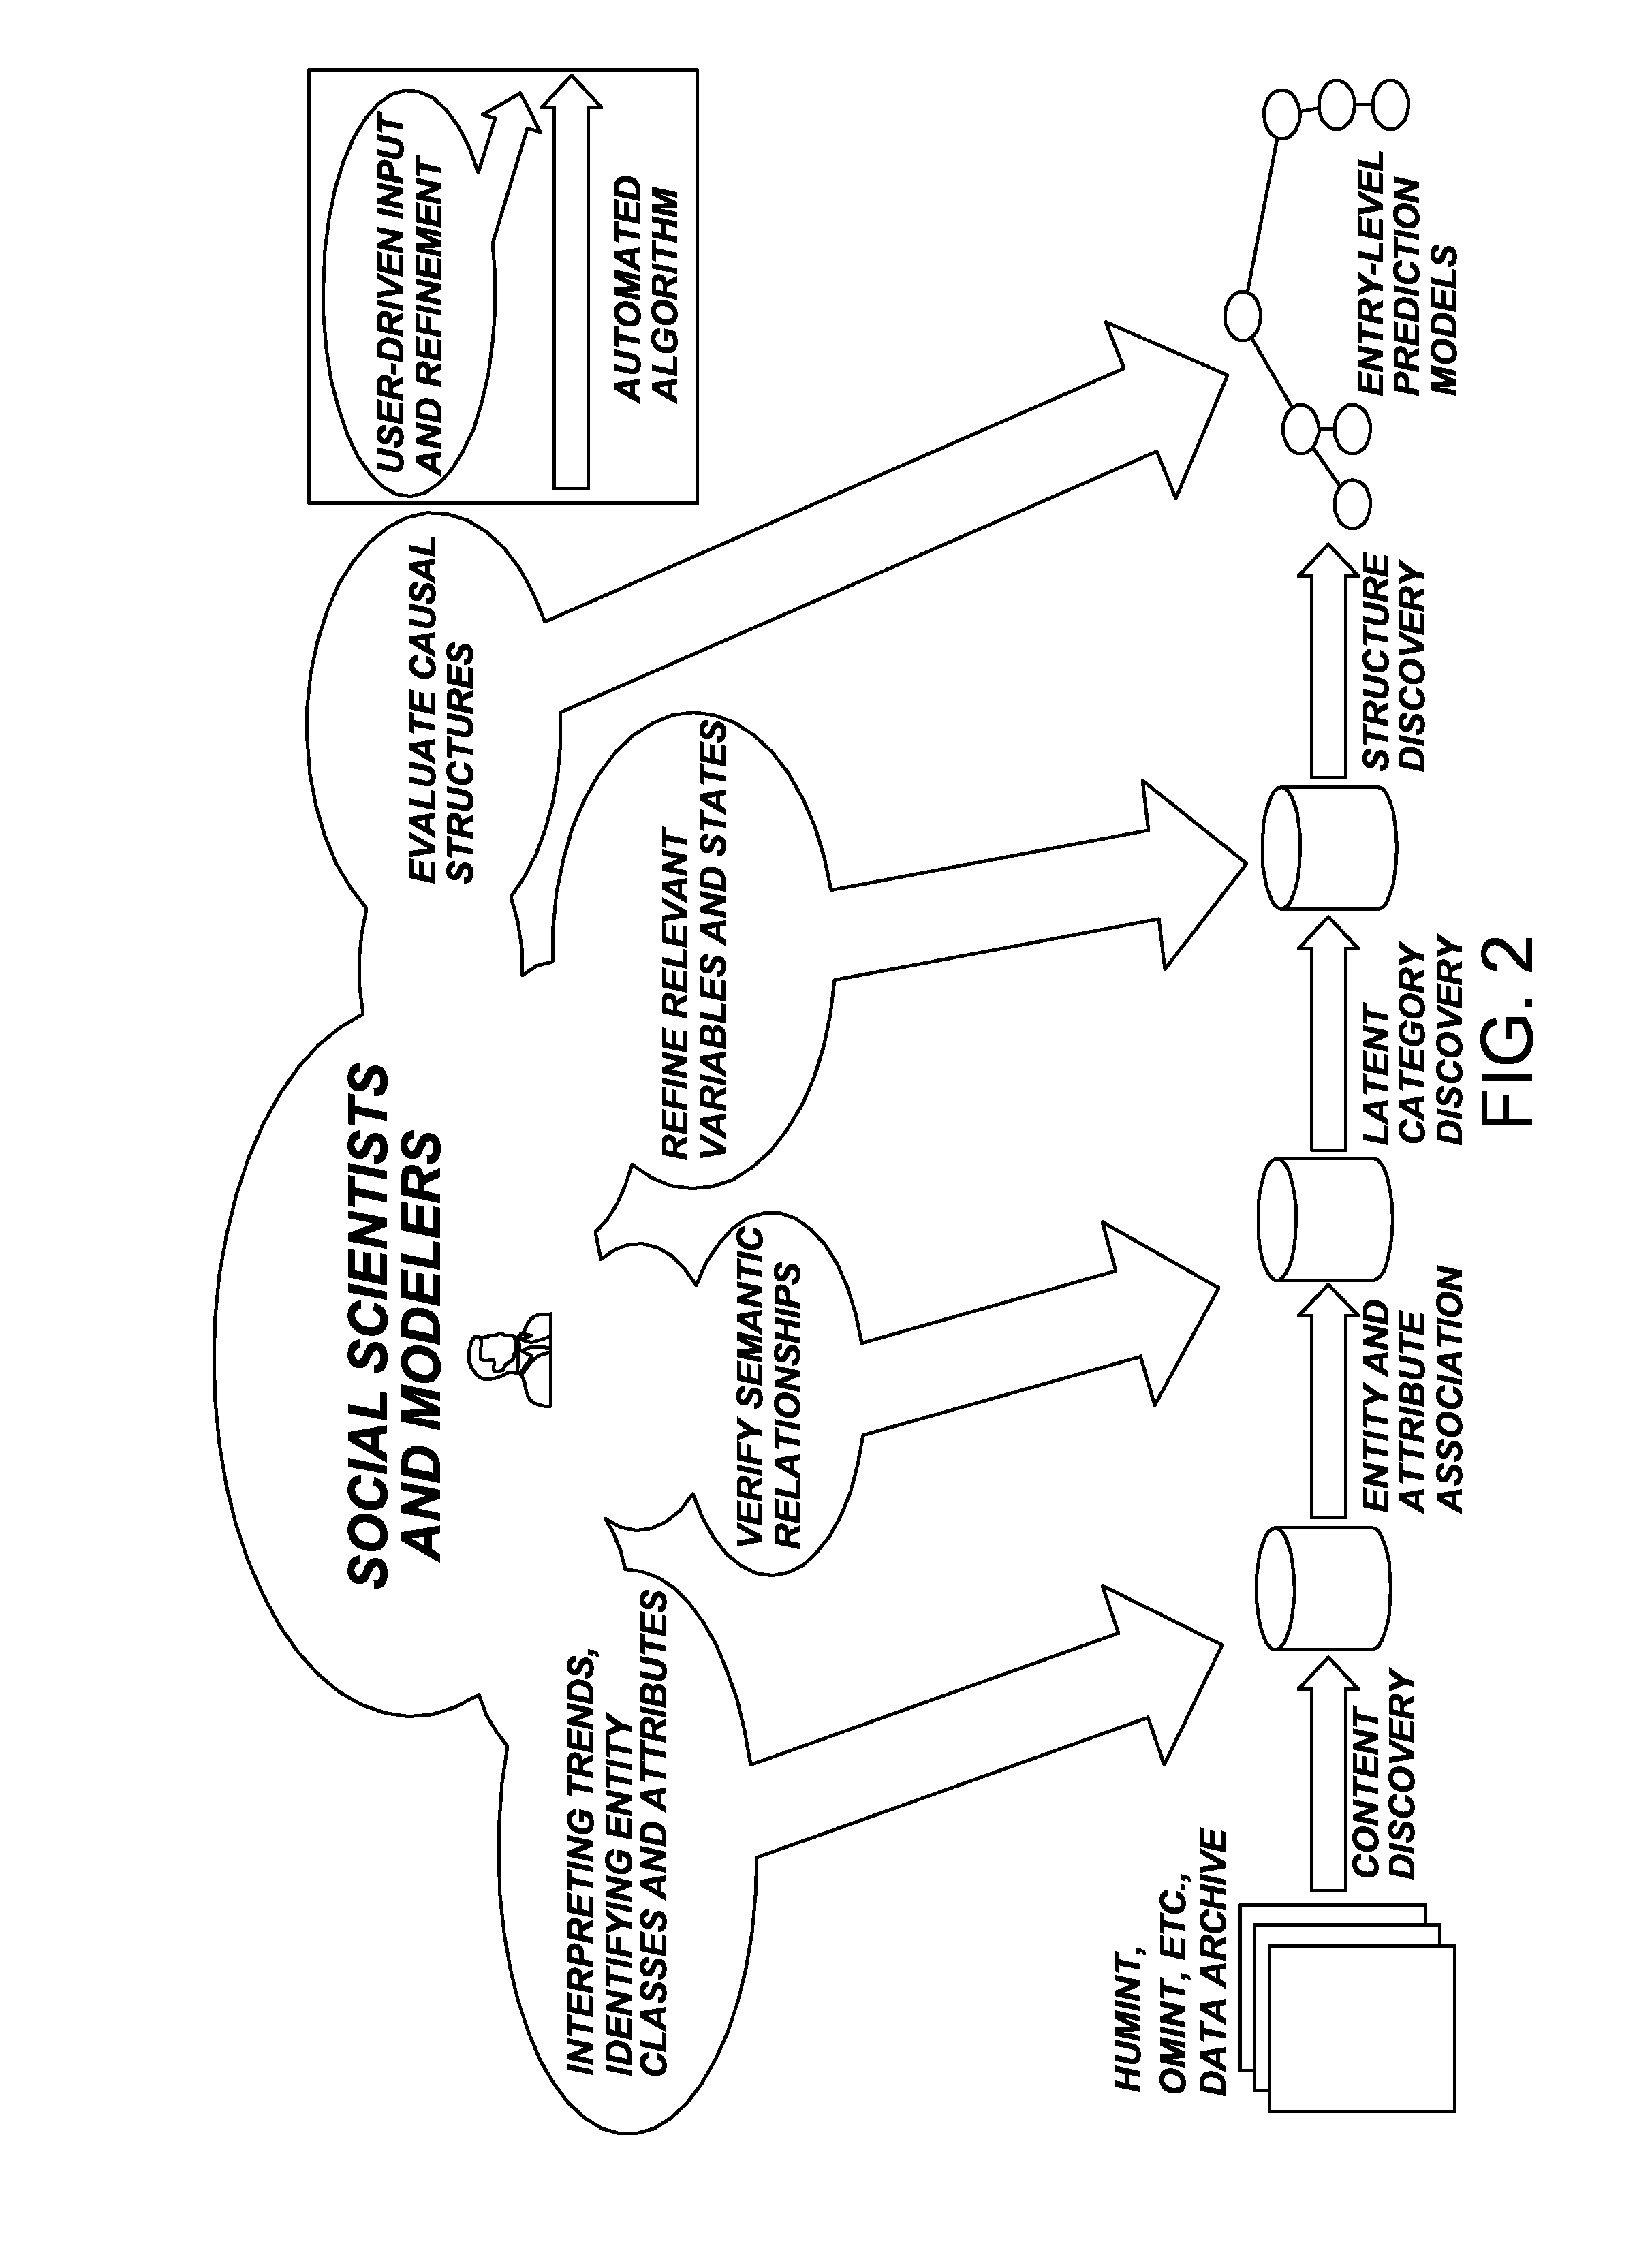 Method and apparatus for creating a predicting model